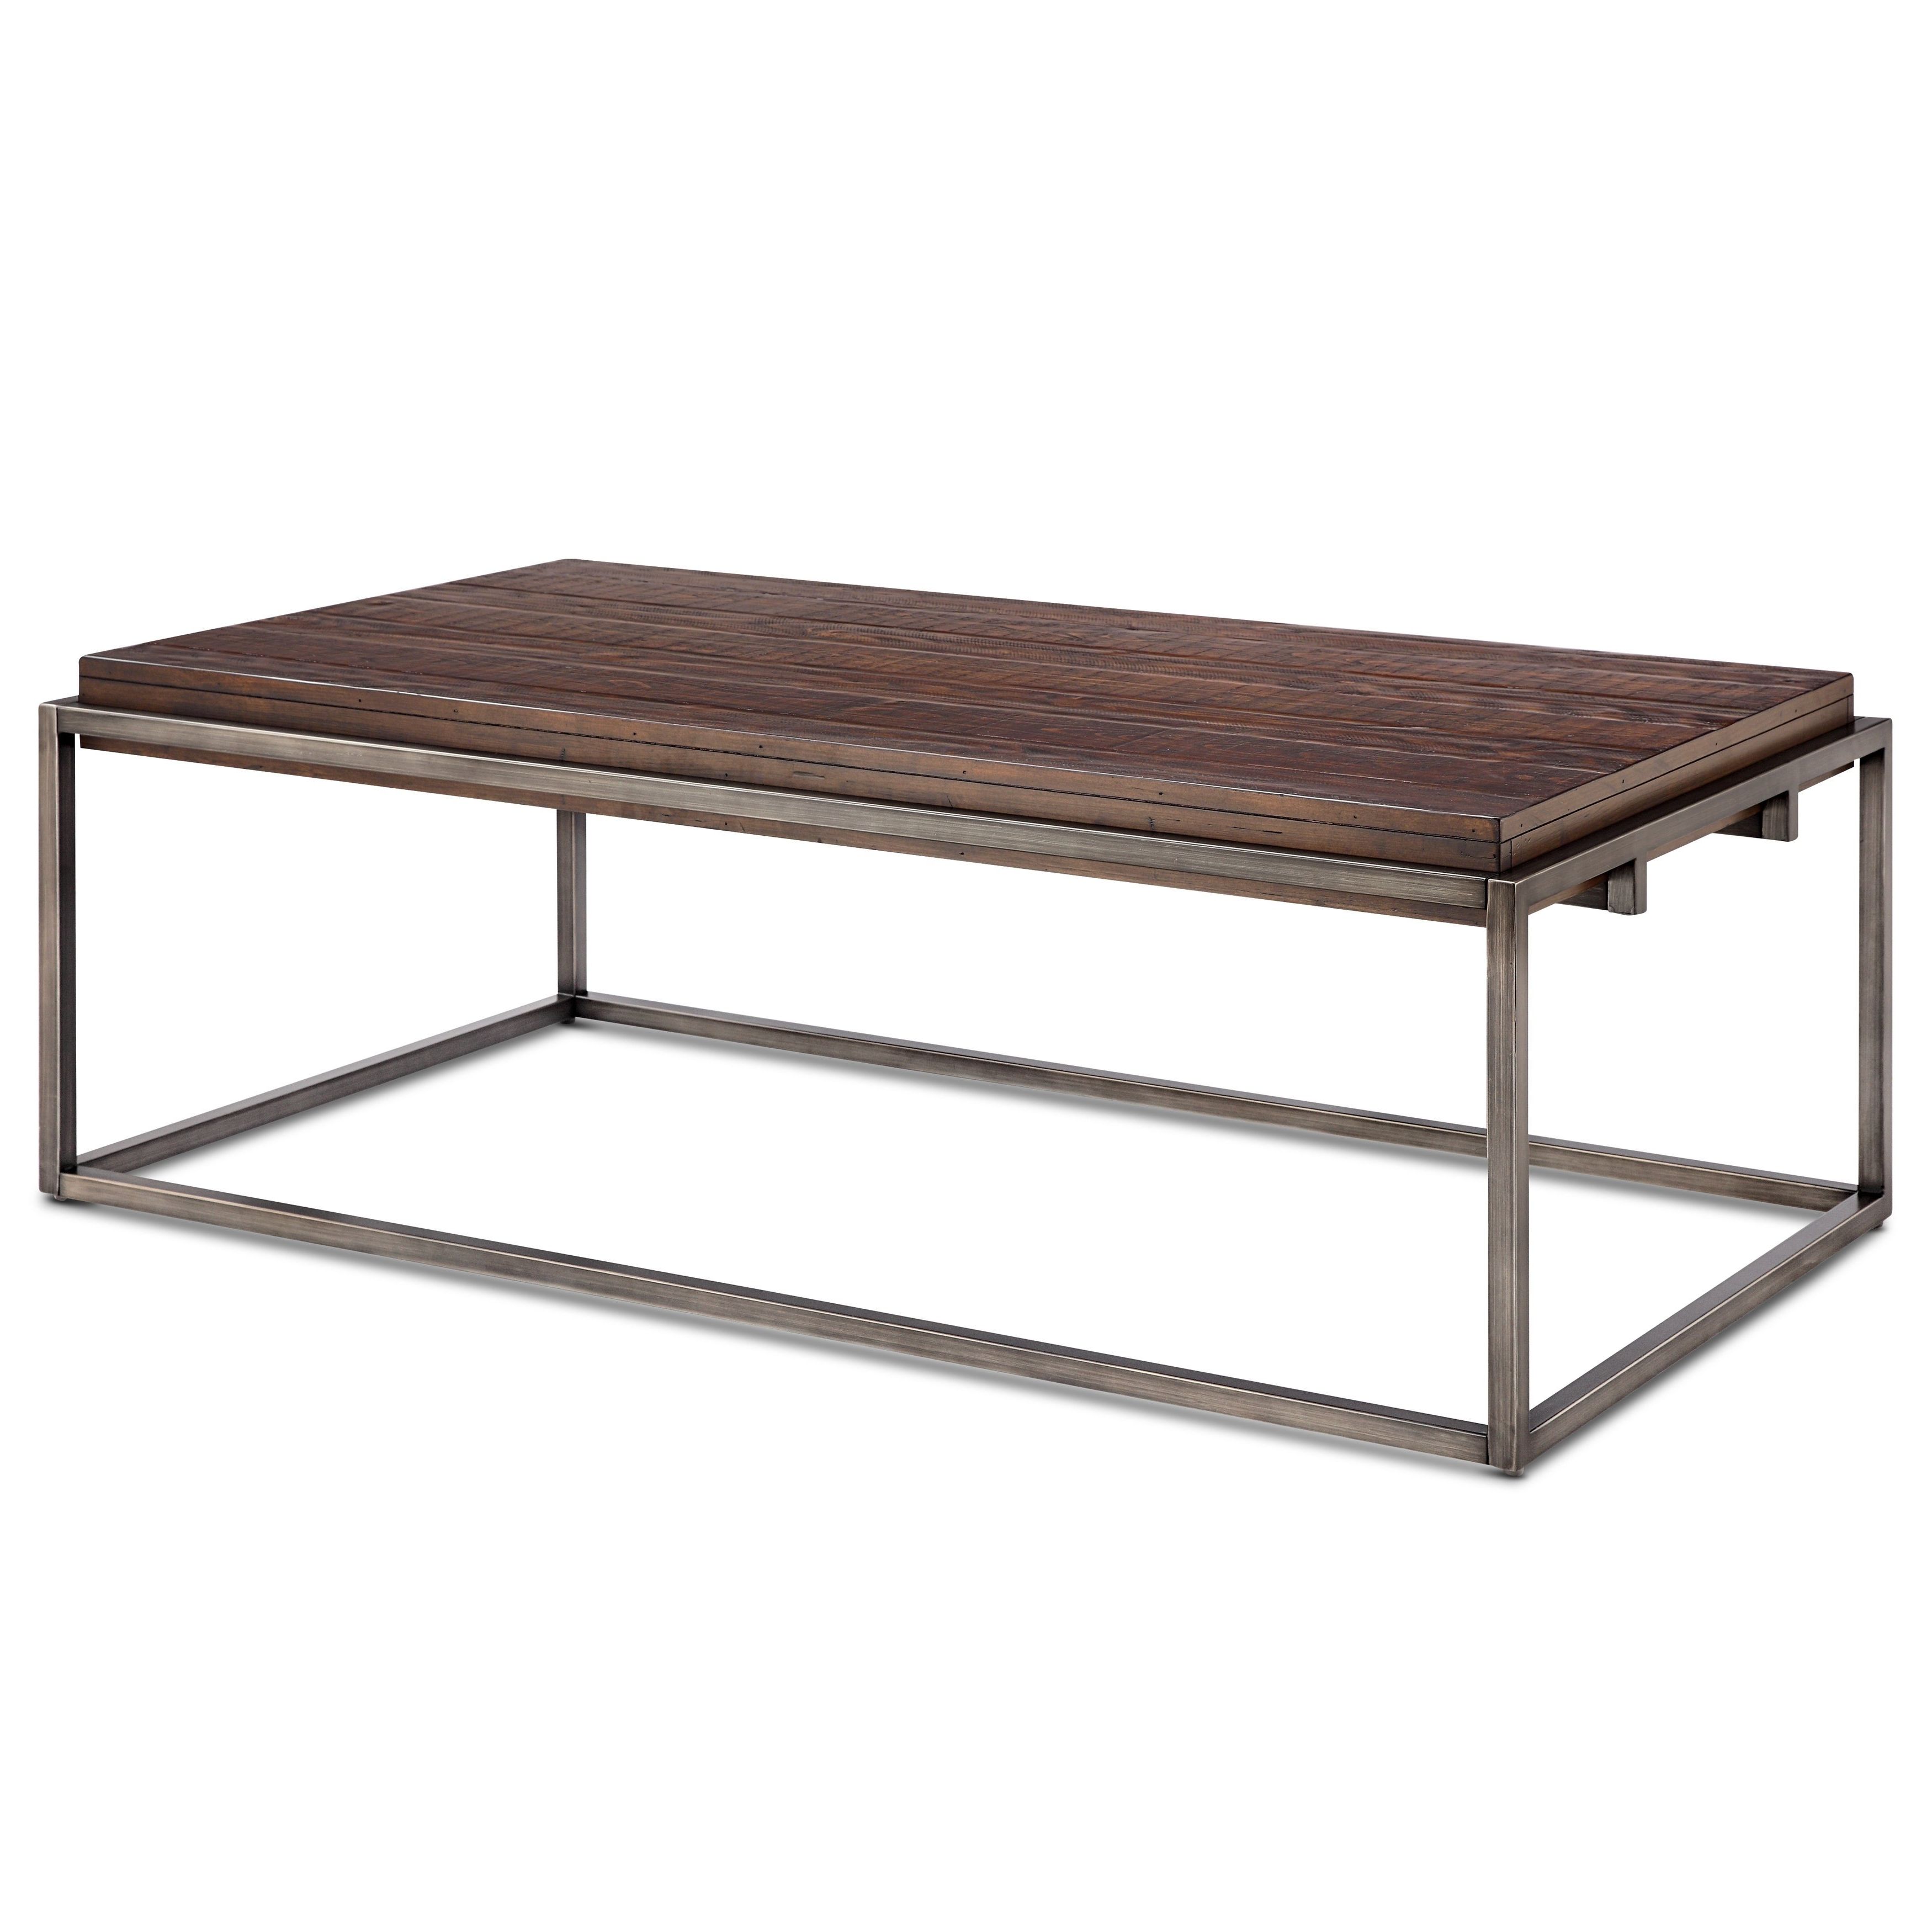 Preferred Lockwood Rectangle Coffee Tables Pertaining To Linville Modern Industrial Rustic Pine Rectangular Coffee Table (View 4 of 20)